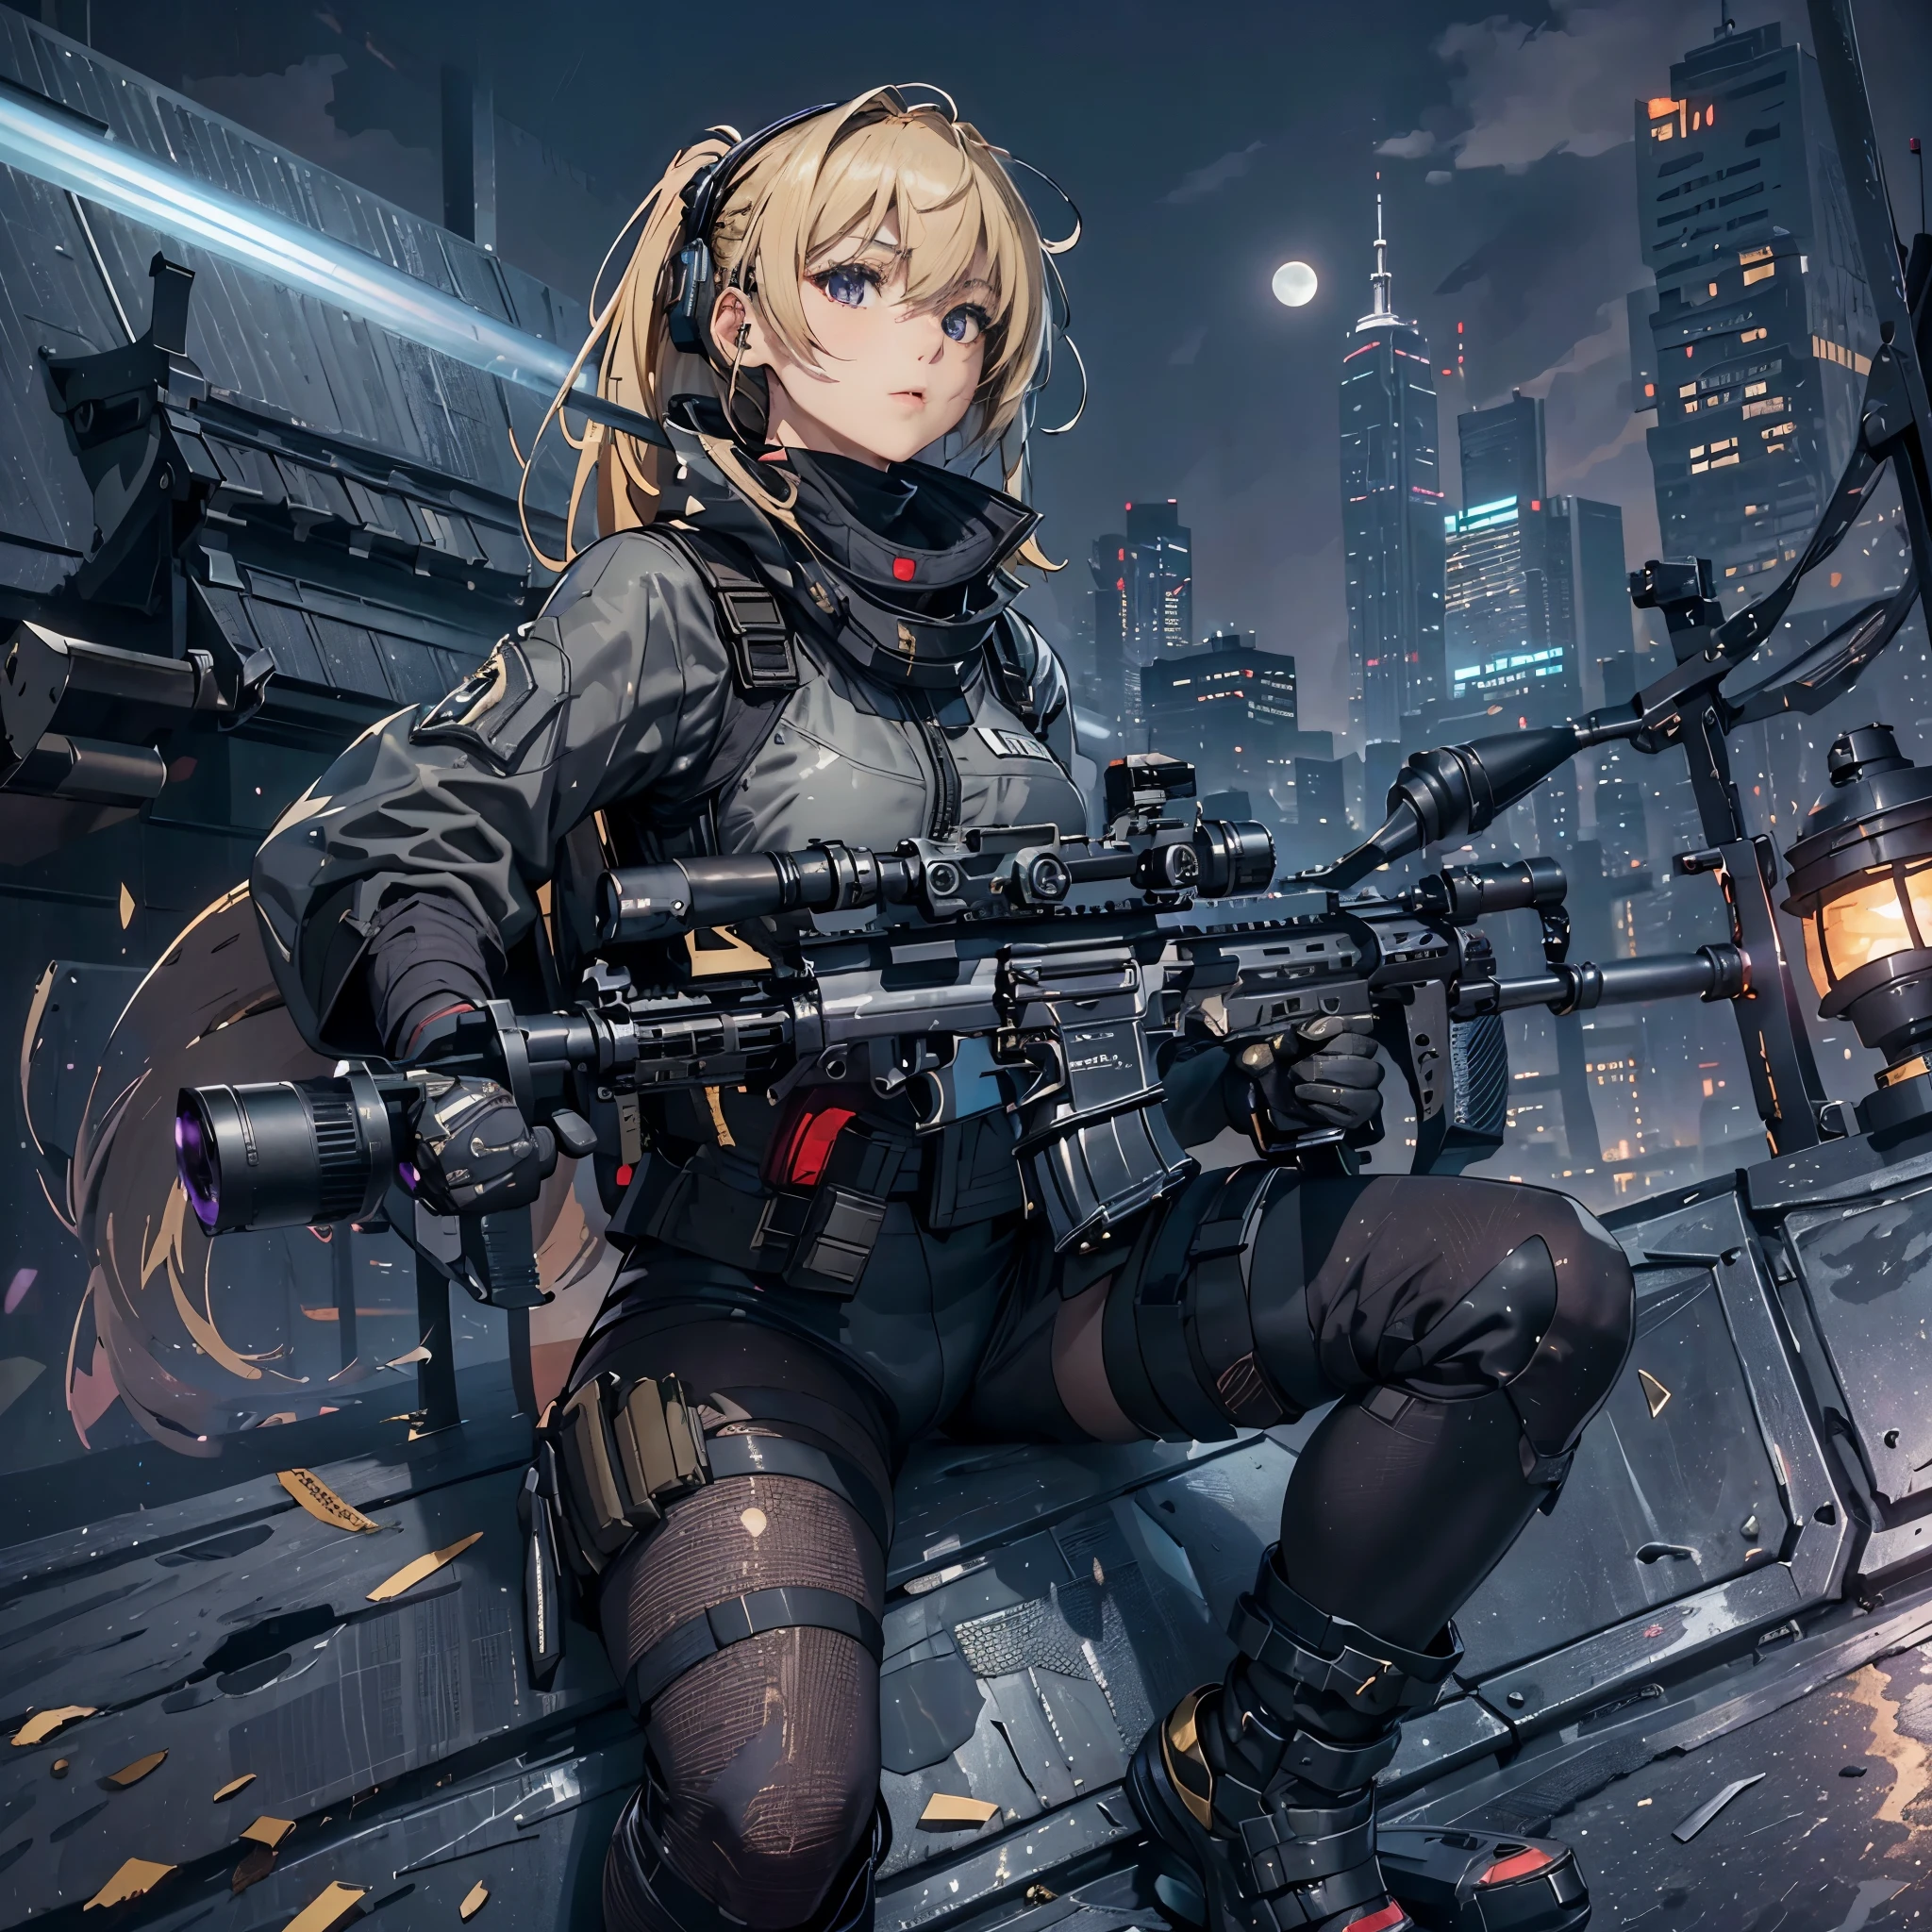 (trained female soldier、beautiful girl)、（GANTZ image:1.3）((Aim and fire your rifle:1.4、Crouching sniper position:1.4、gun、H&k hk416))、1 female、tHick body、(black cyber tech wear、camouflage pantyhose:1.2)、( gold Hair、Blonde hair with purple mesh color:1.3)、((Super high resolution))、Detail Write、masterpiece、（midjorurny style.:1.2）highest quality、Highly detailed CG、8K quality、CinematograpHic ligHting、Lens flare、BREAK.(Skyscraper rooftop at nigHt:1.4)、hyper detail、((Dynamic Angle Bust SHots:1.4))、Detailed depiction of futuristic guns、Rifle witH perfect detail、Perfect barrel tHat does not distort、FigHter in tHe sky、（Realistic angle、Peeking into the scope:1.3）BREAK、blonde with purple bangs:1.4（particles of light around:1.2）Before dawn（Dawn Sun、Before dawn、daybreak.beautiful red moon、meteors:1.6）